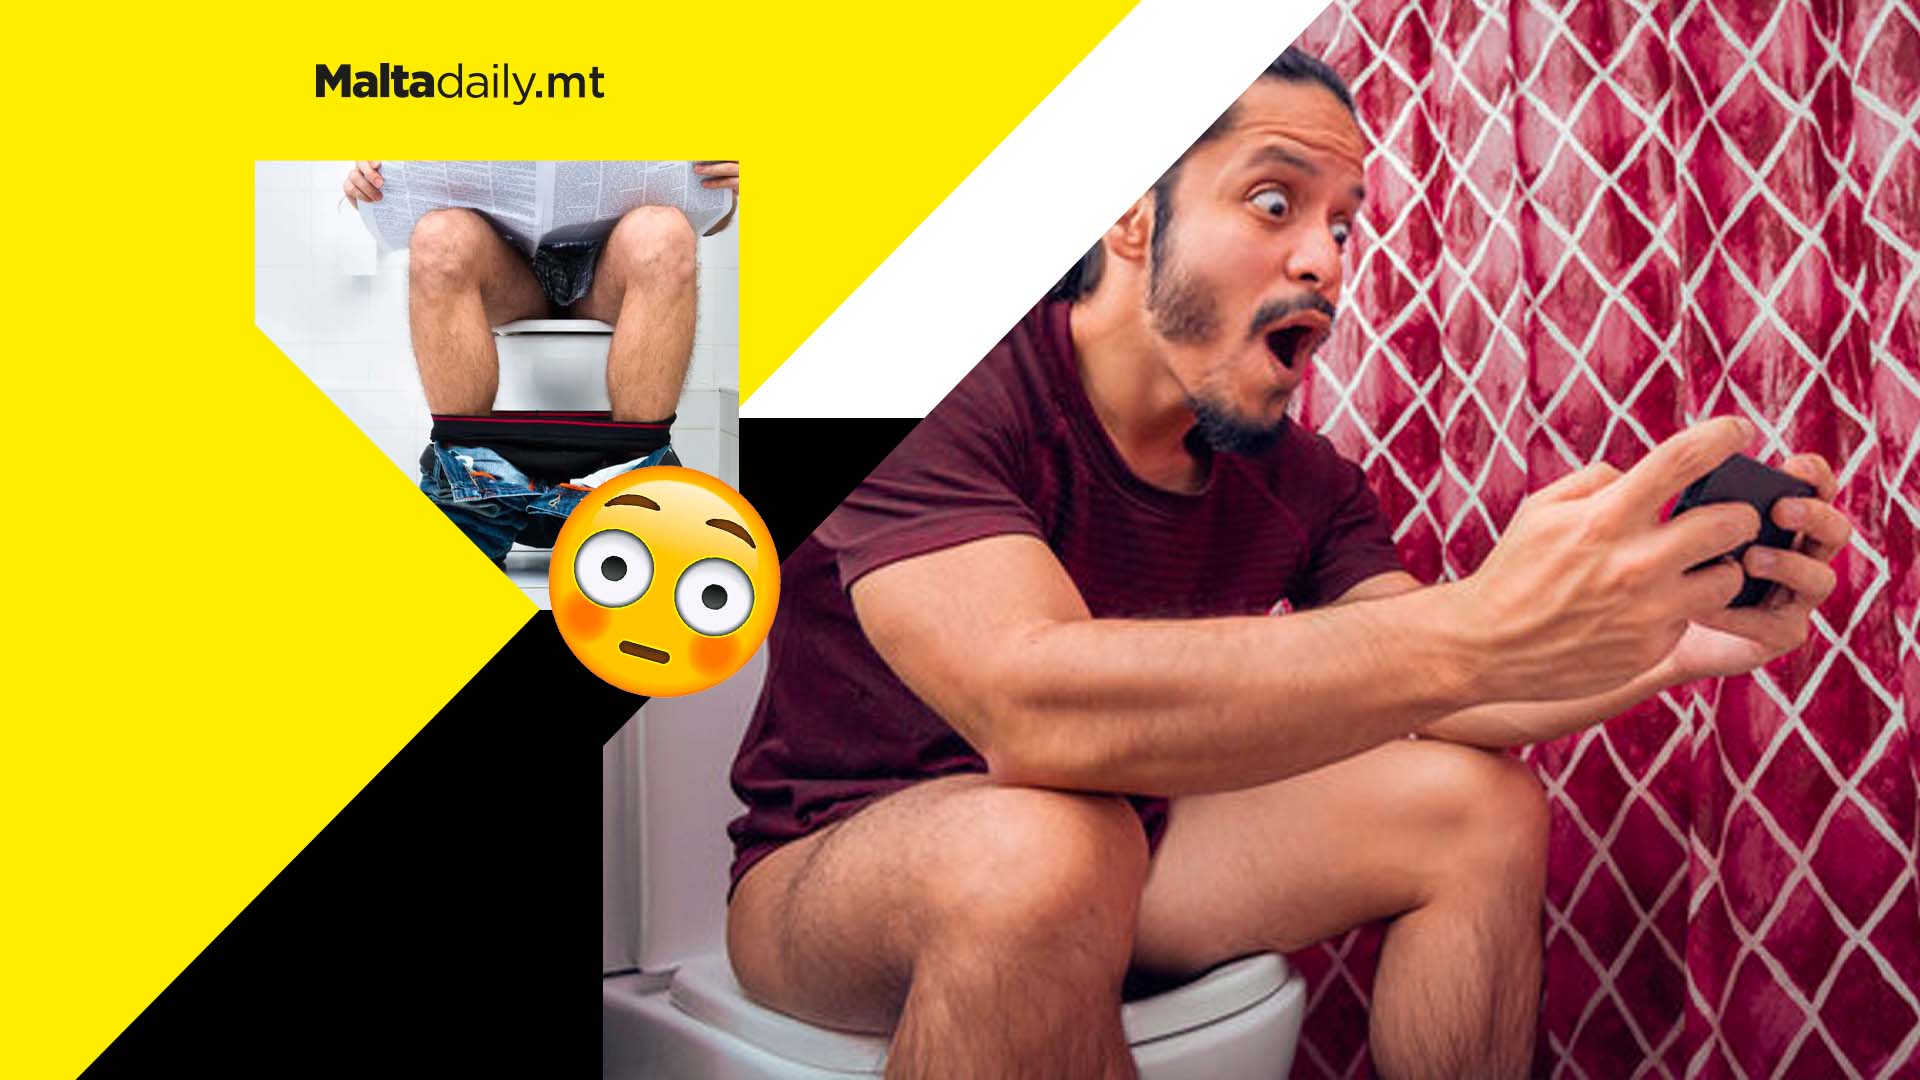 Avoid spending more than five minutes on the toilet warn experts